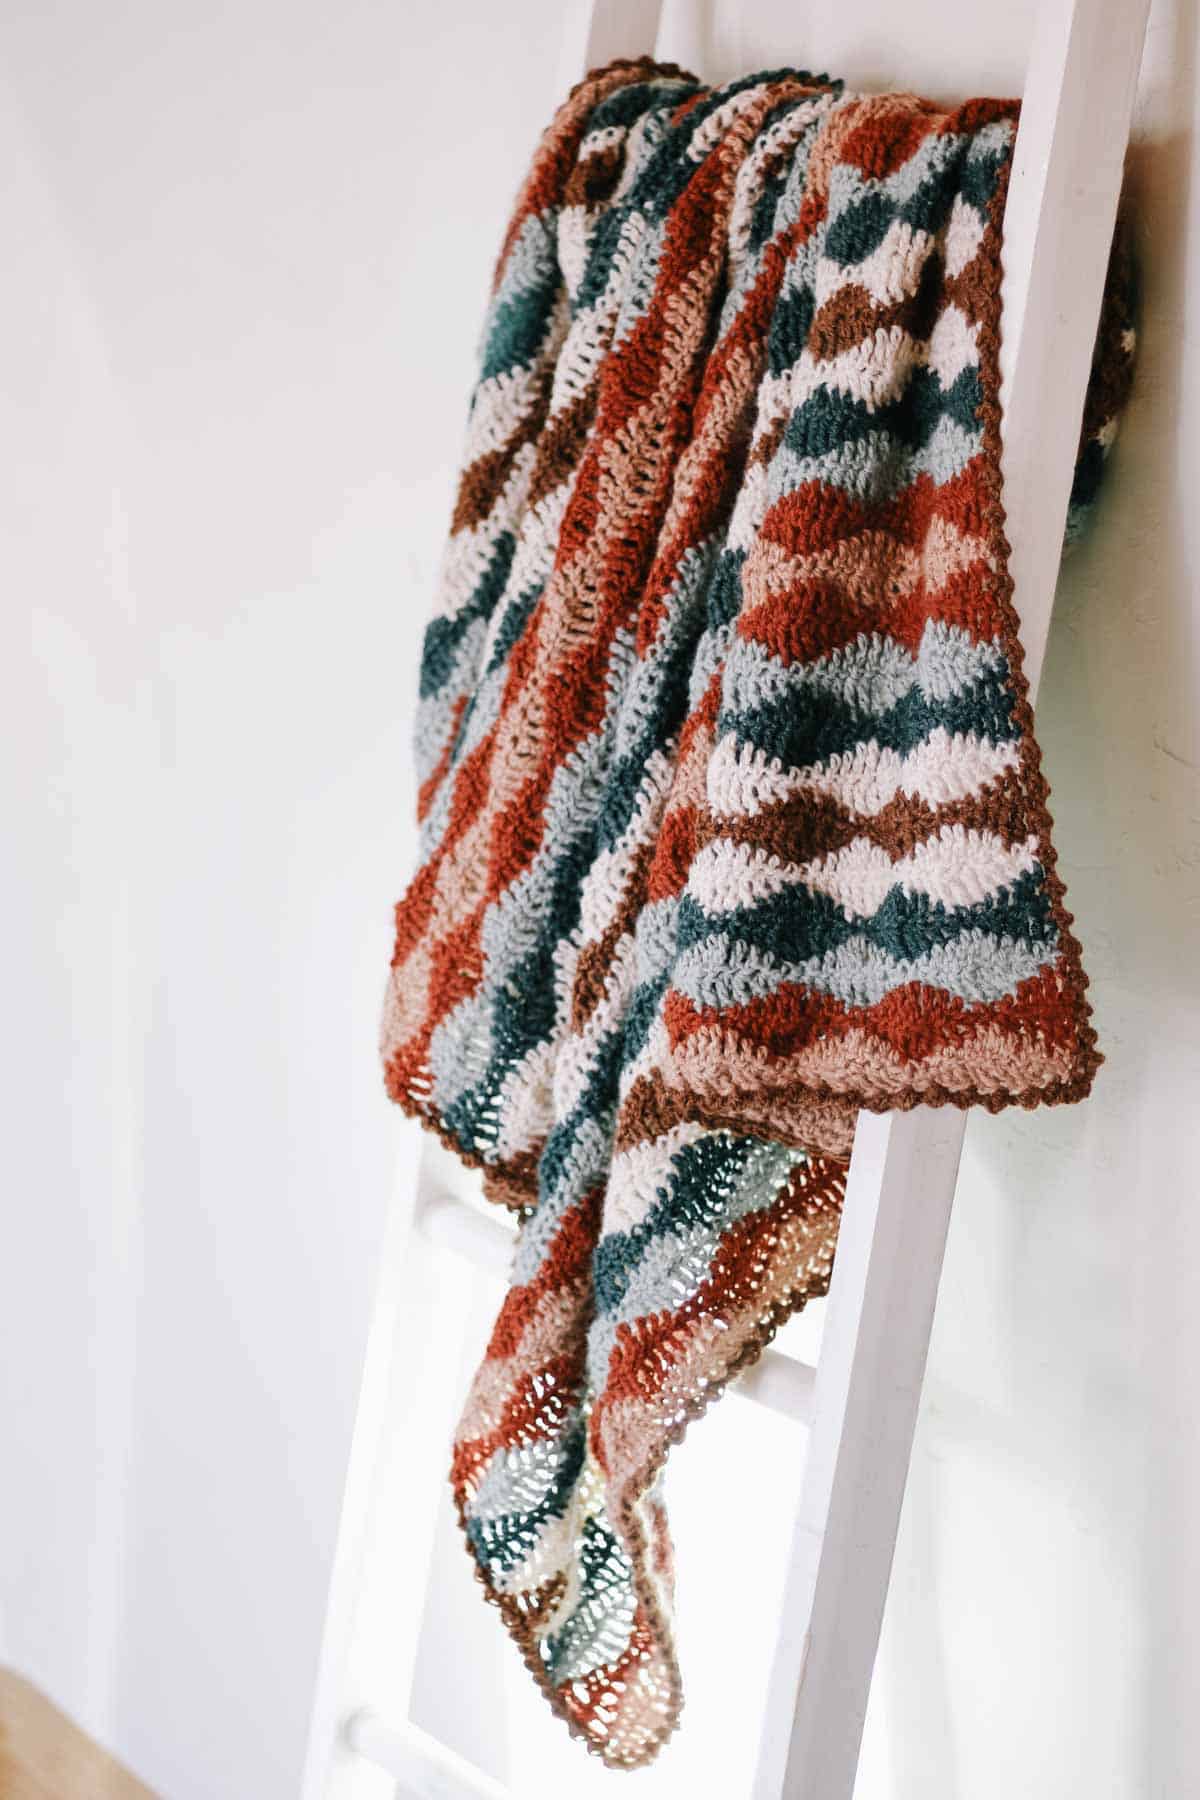 A wavy crochet blanket hanging on a white ladder.